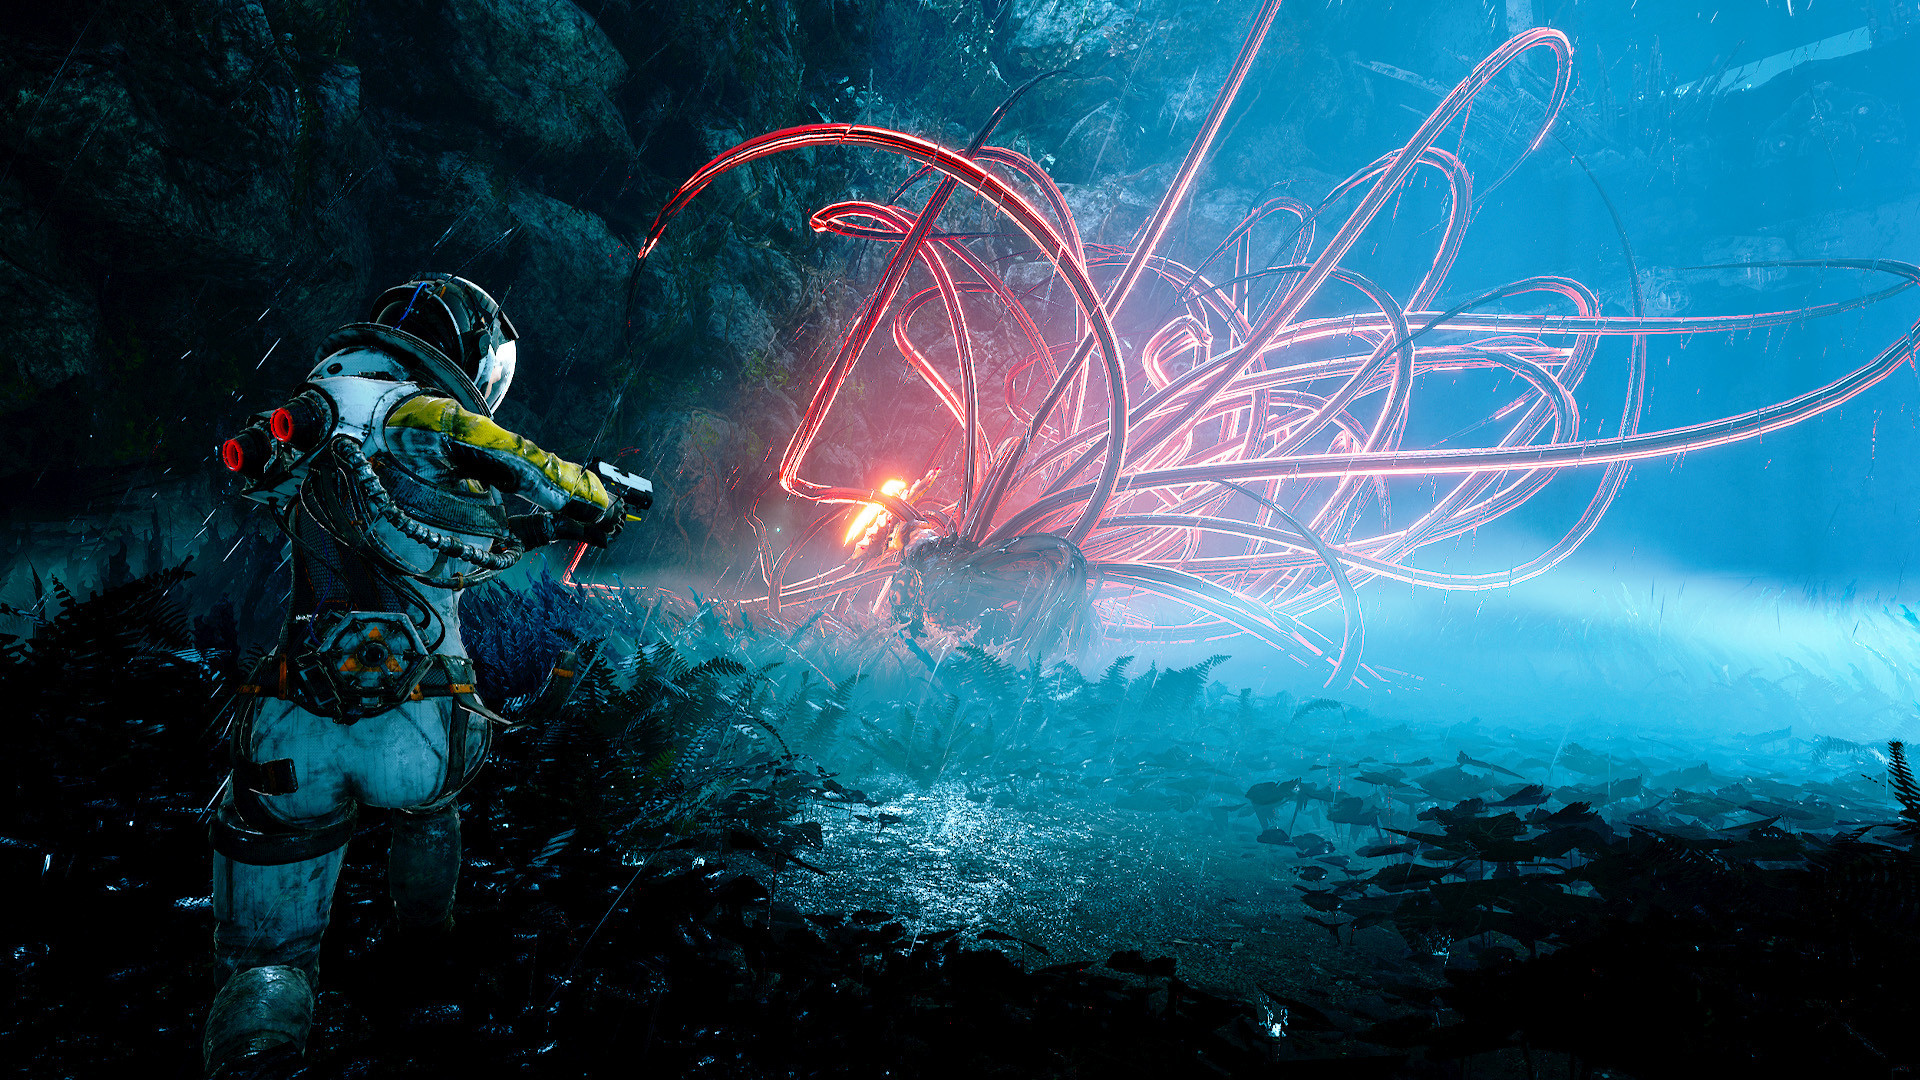 Best Returnal settings: A many tentacled monster prepares to pounce on the game's protagonist (left)